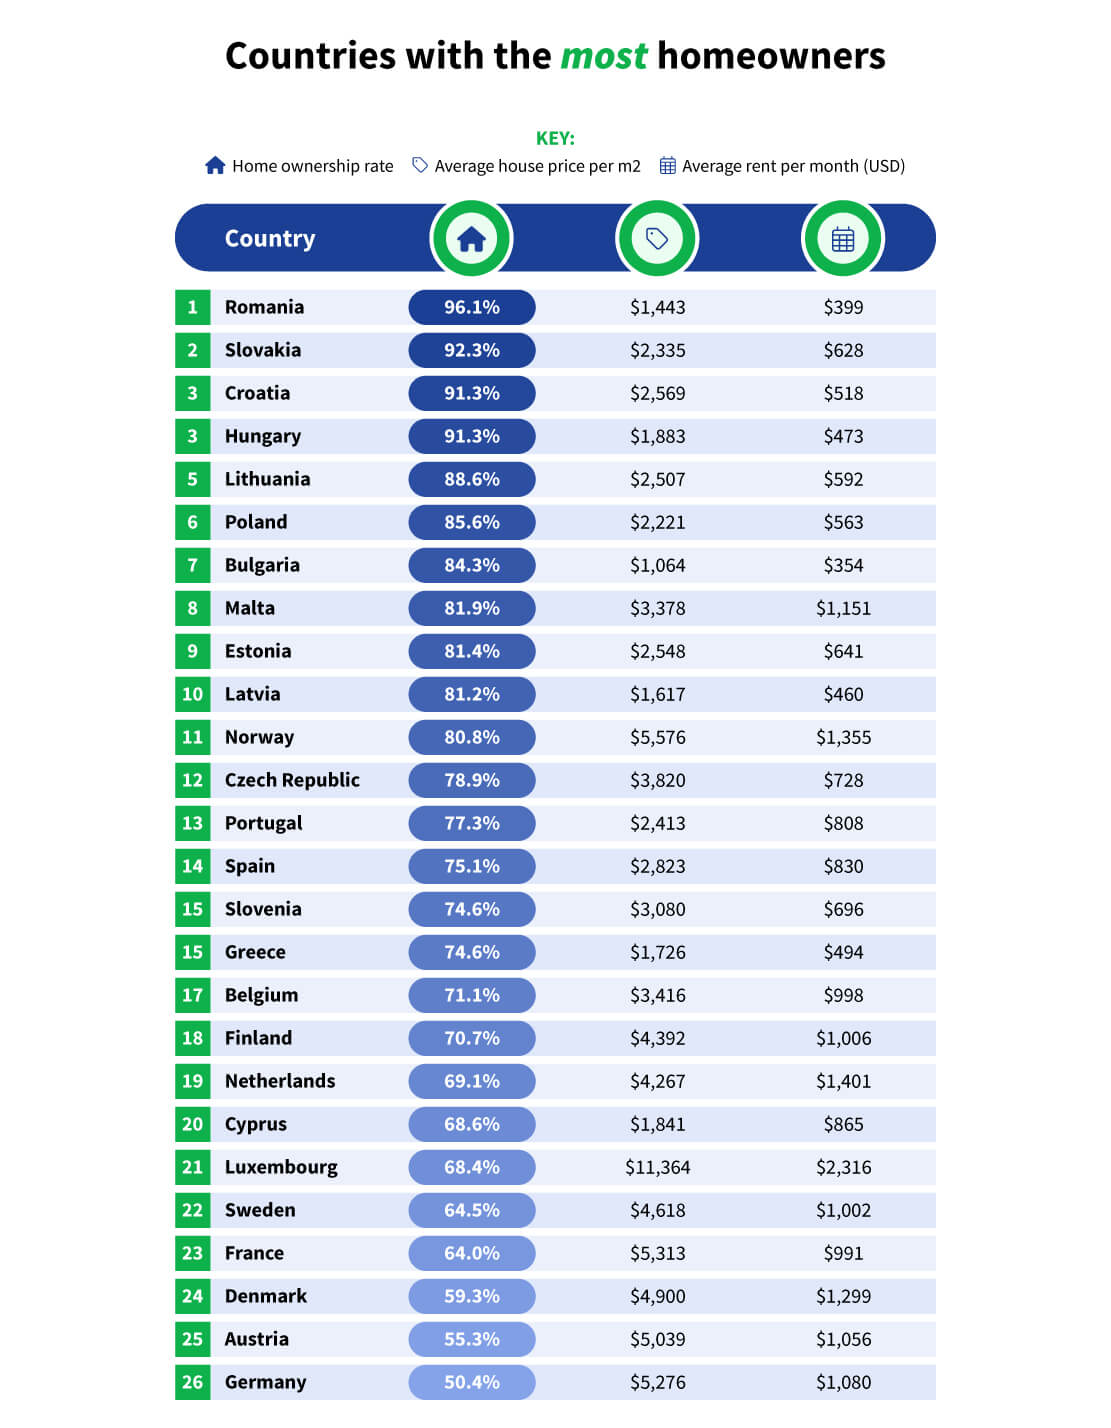 Top 26 countries with the most homeowners